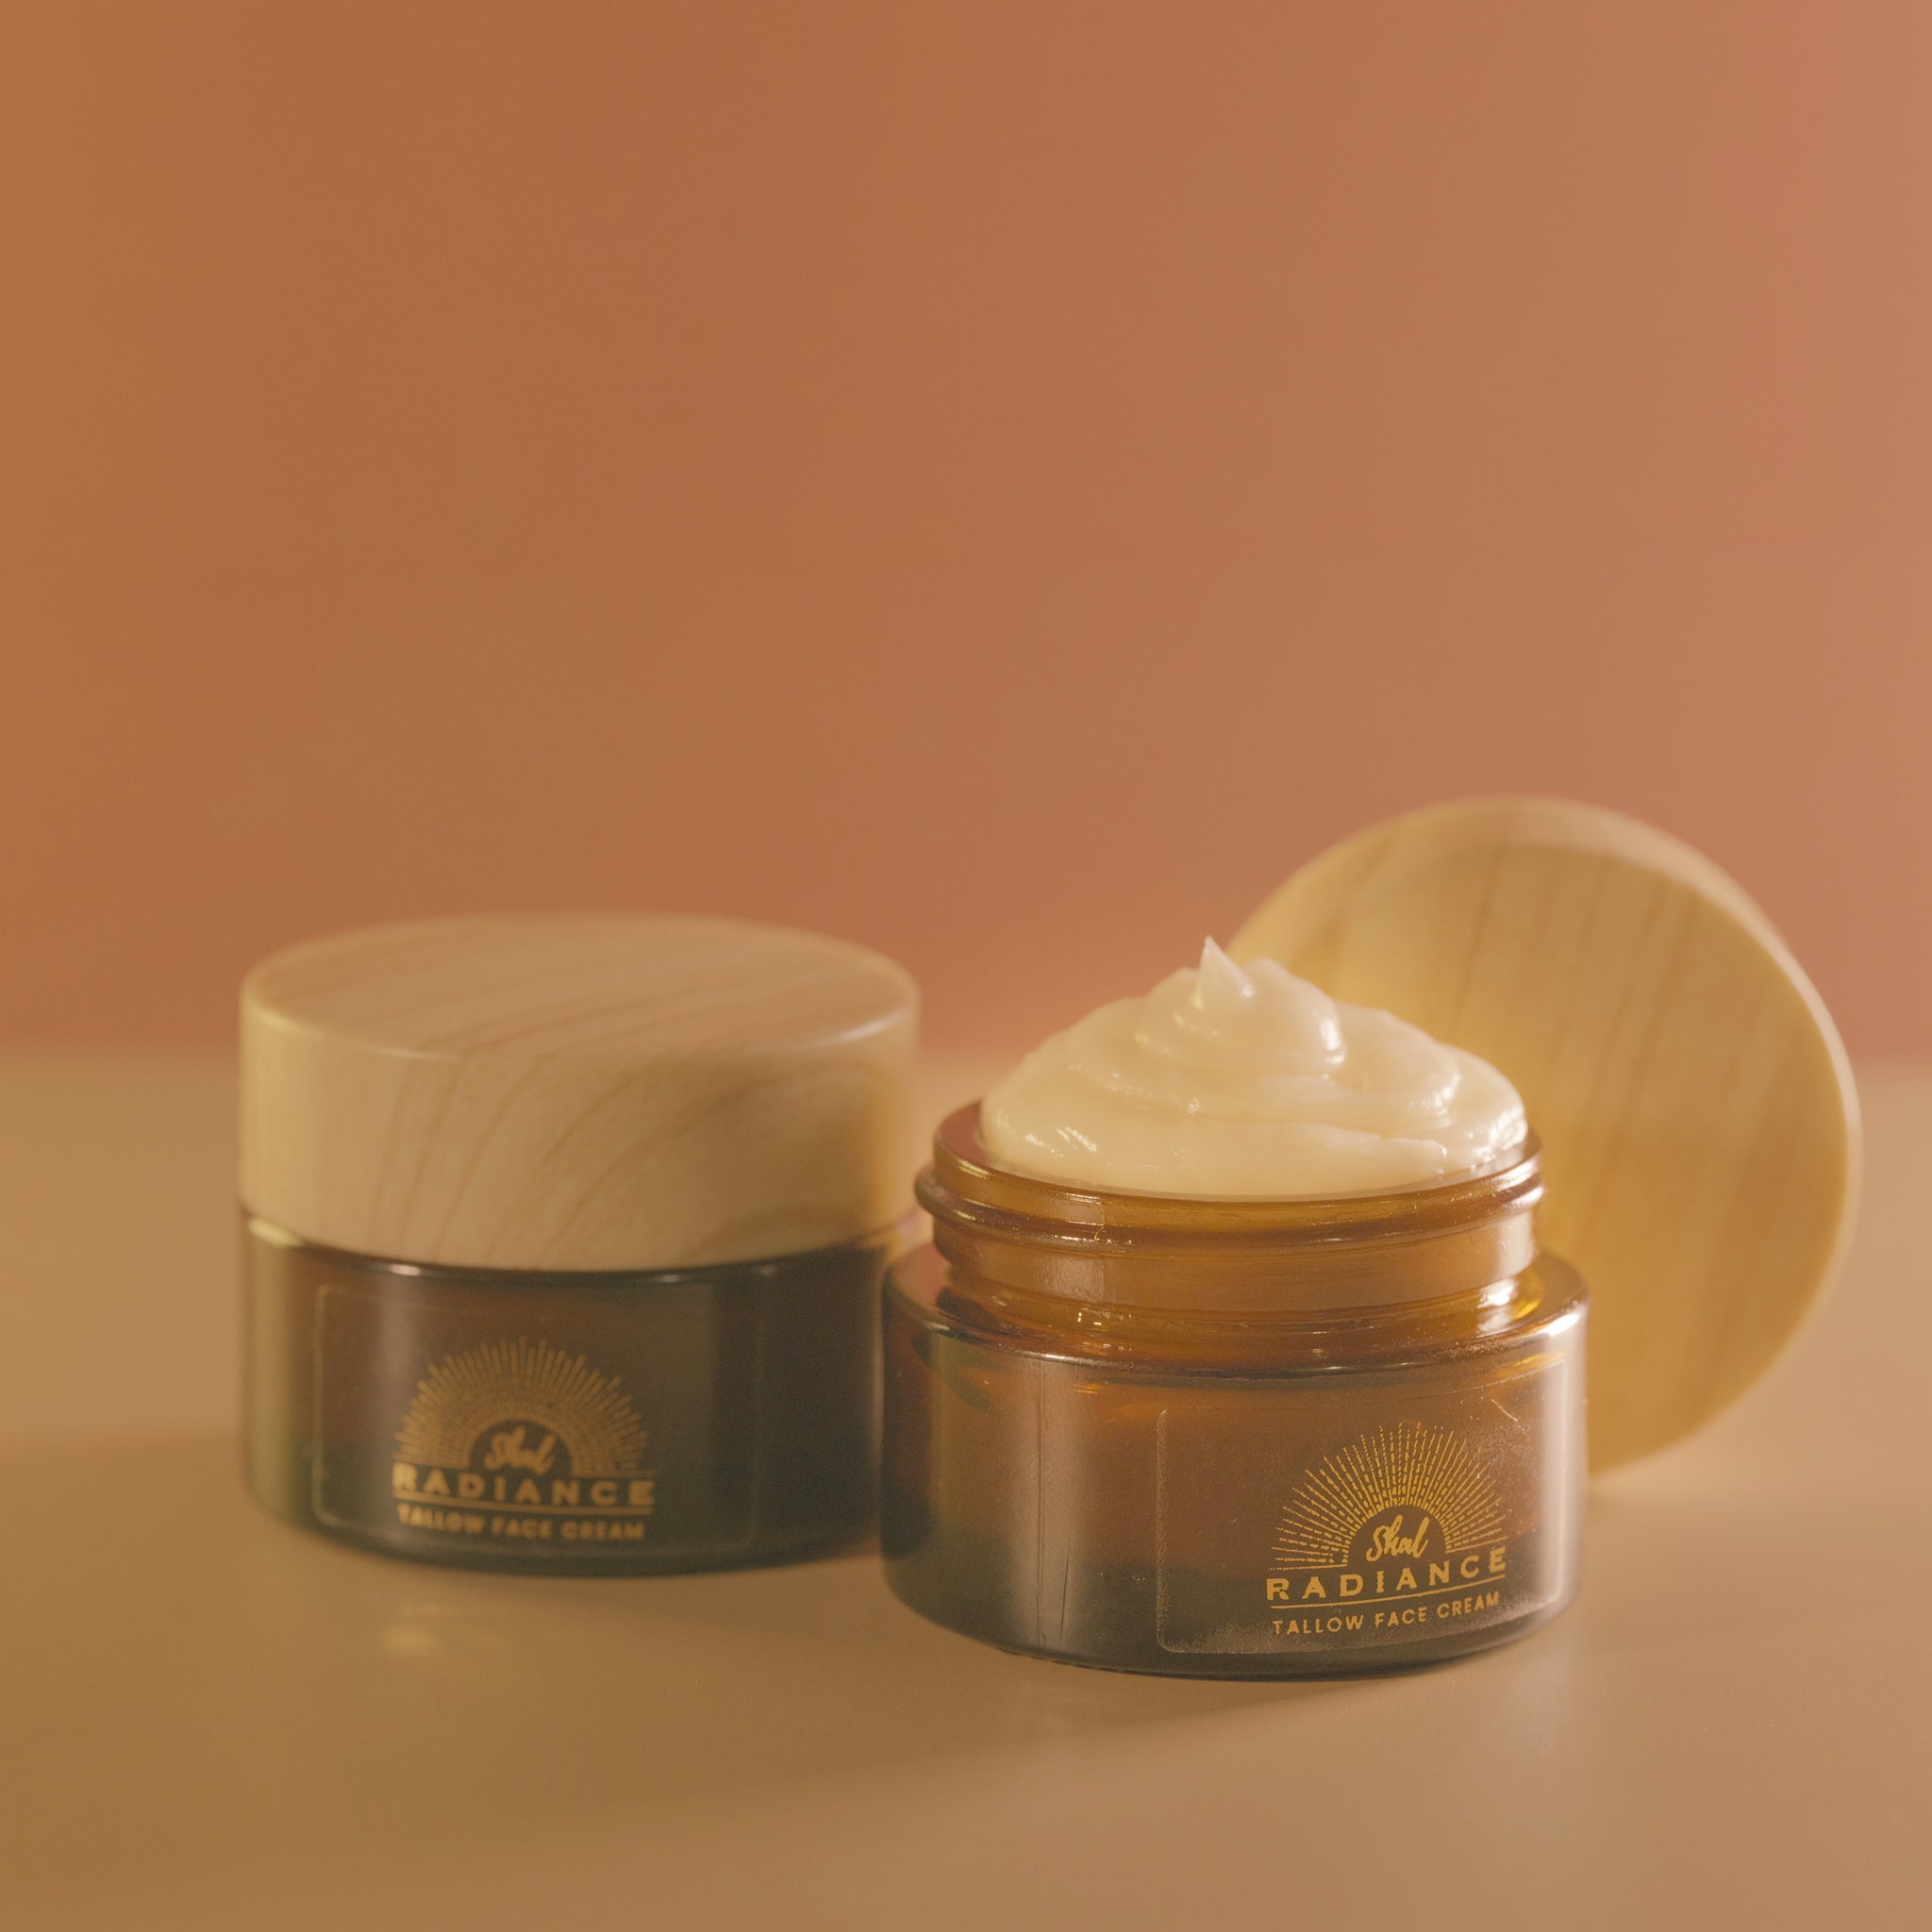 Tallow Face Cream For Dry Skin - By Shal Radiance - Shal Radiance